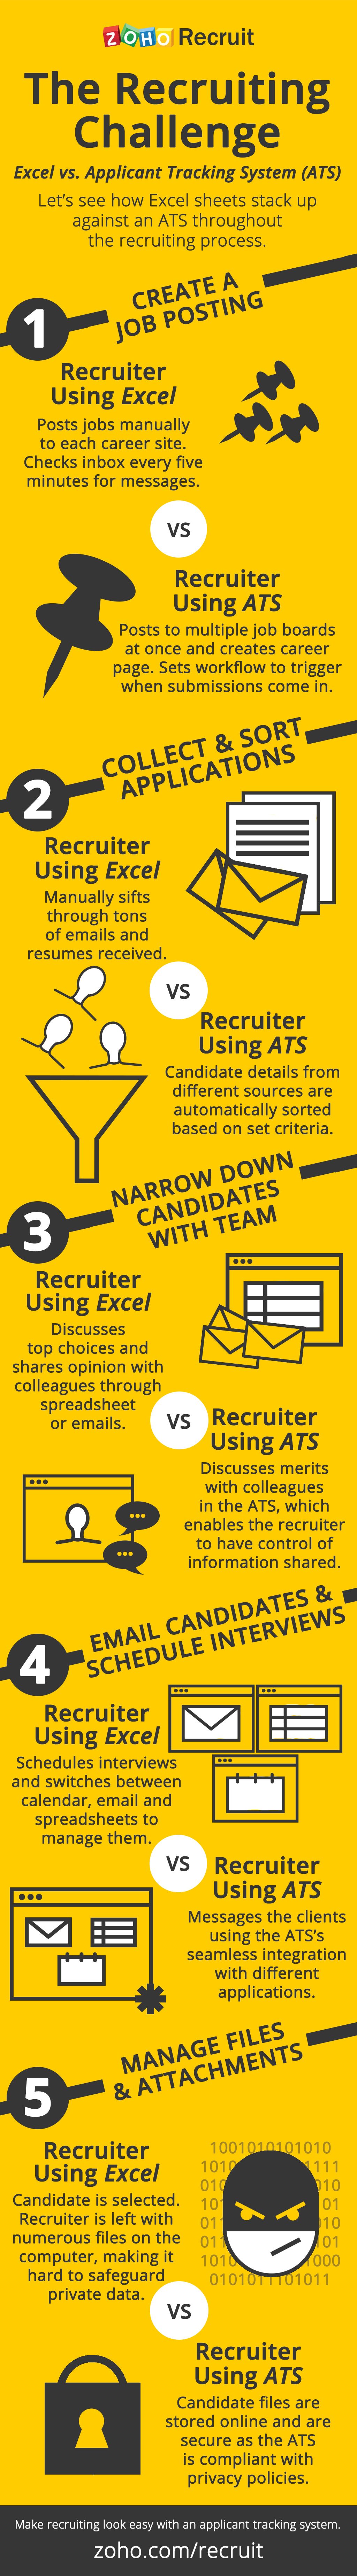 ATS vs Excel Infographic